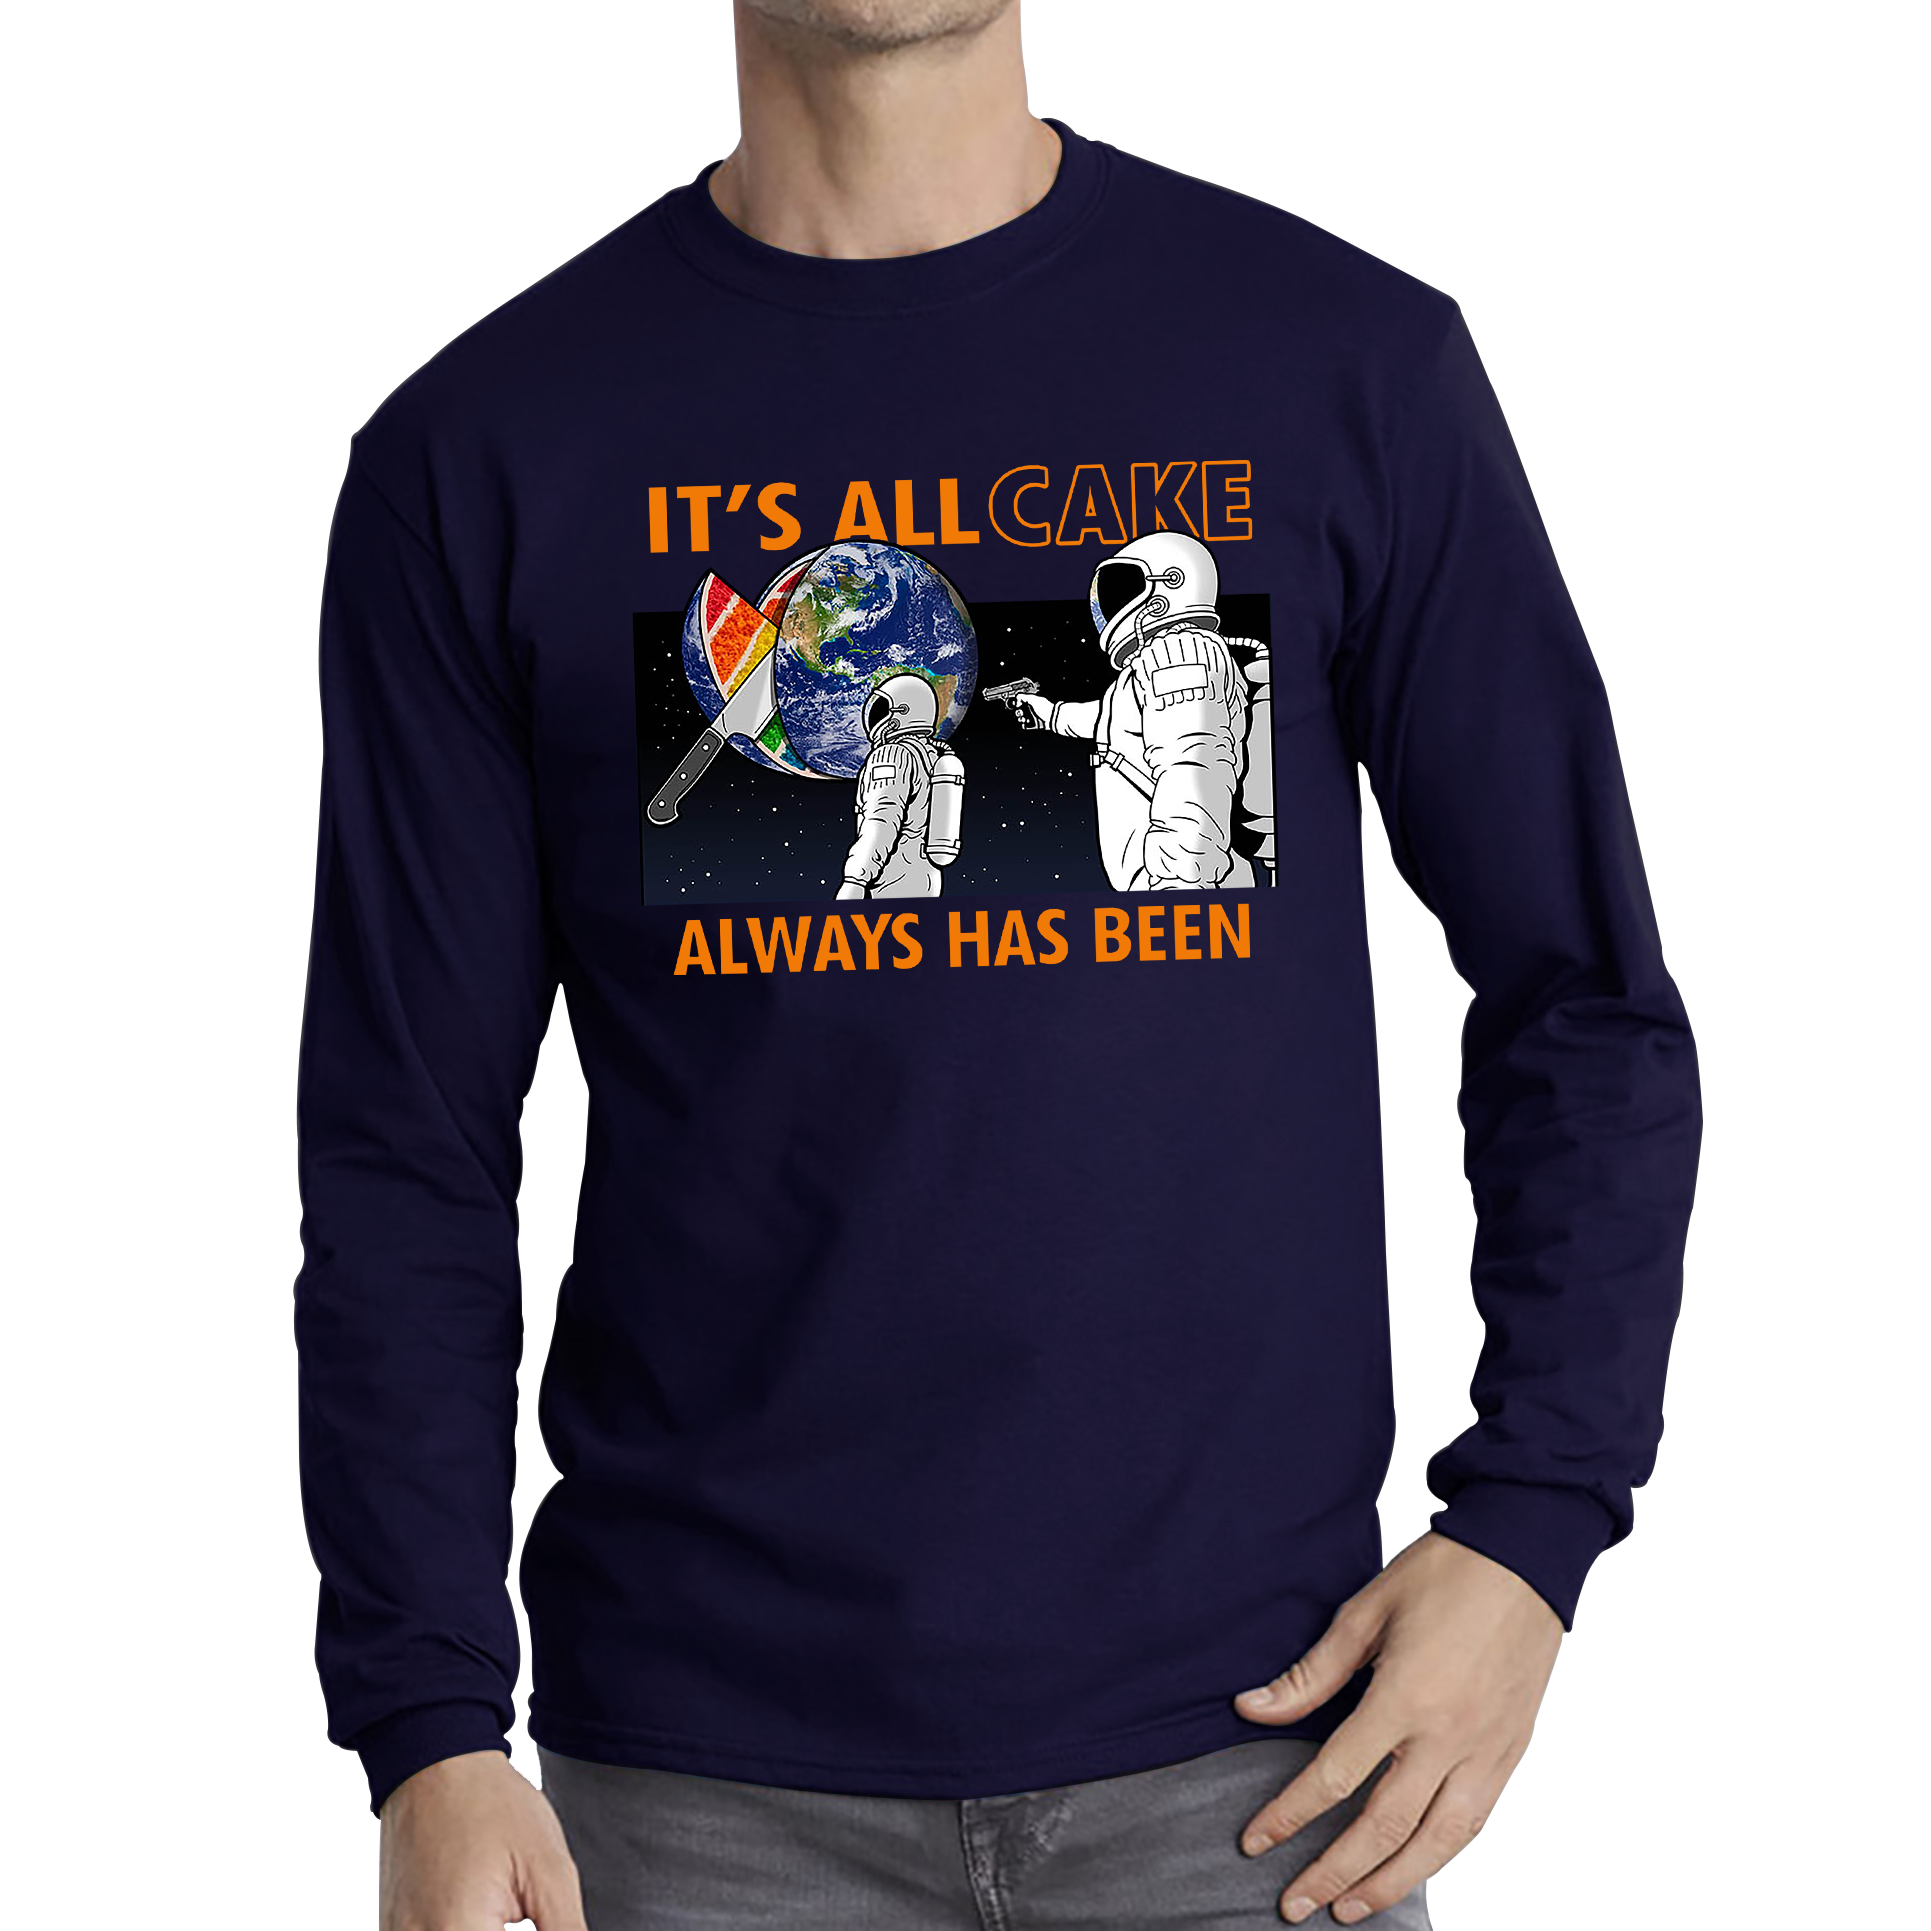 It's All Cake (Always Has Been) Astronaut Space Picture Funny Saying Novelty Meme Adult Long Sleeve T Shirt